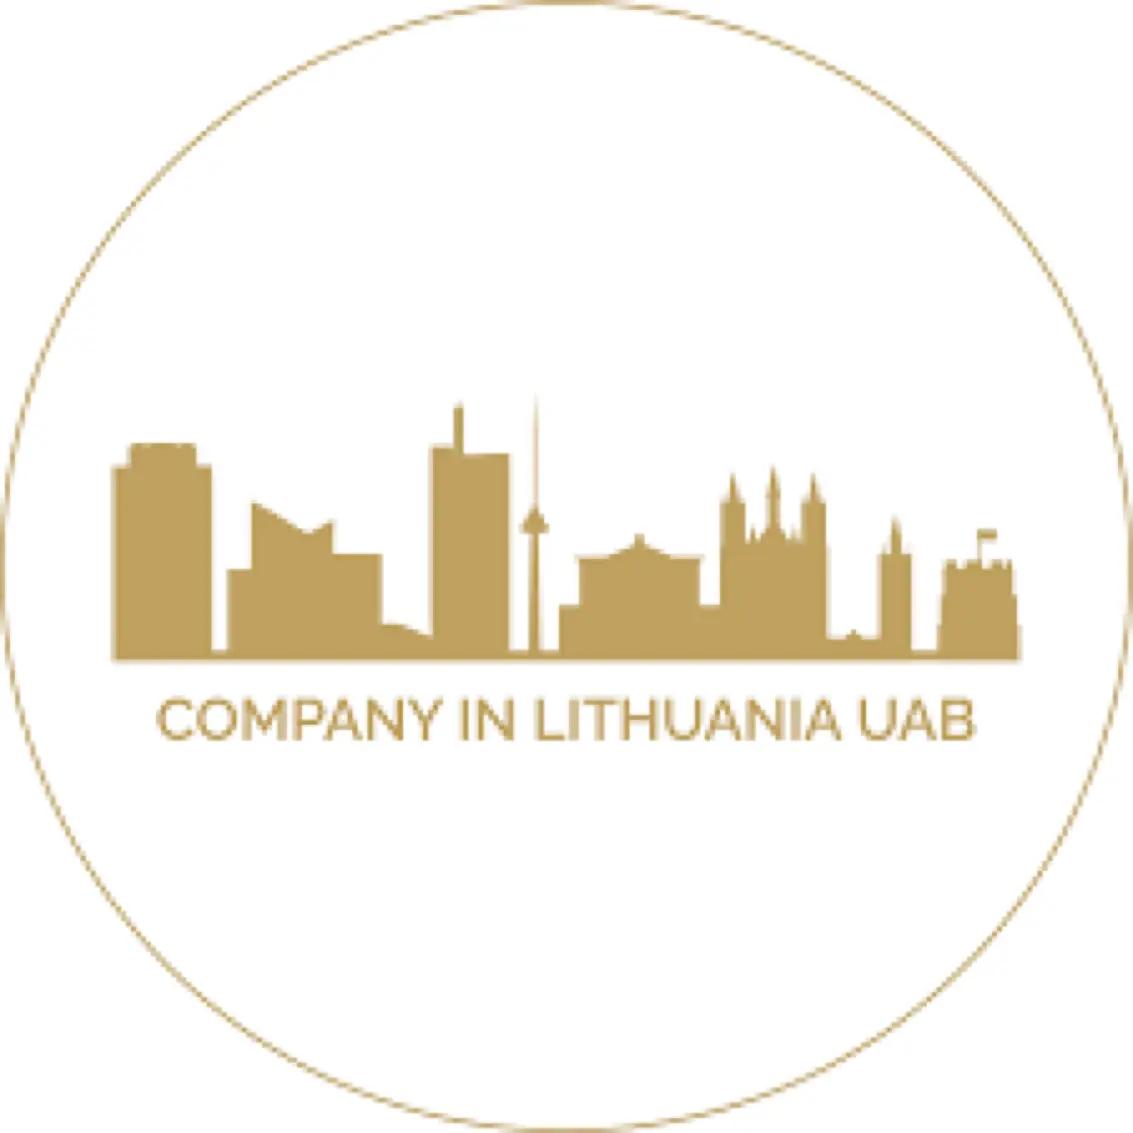 Company in Lithuania UAB